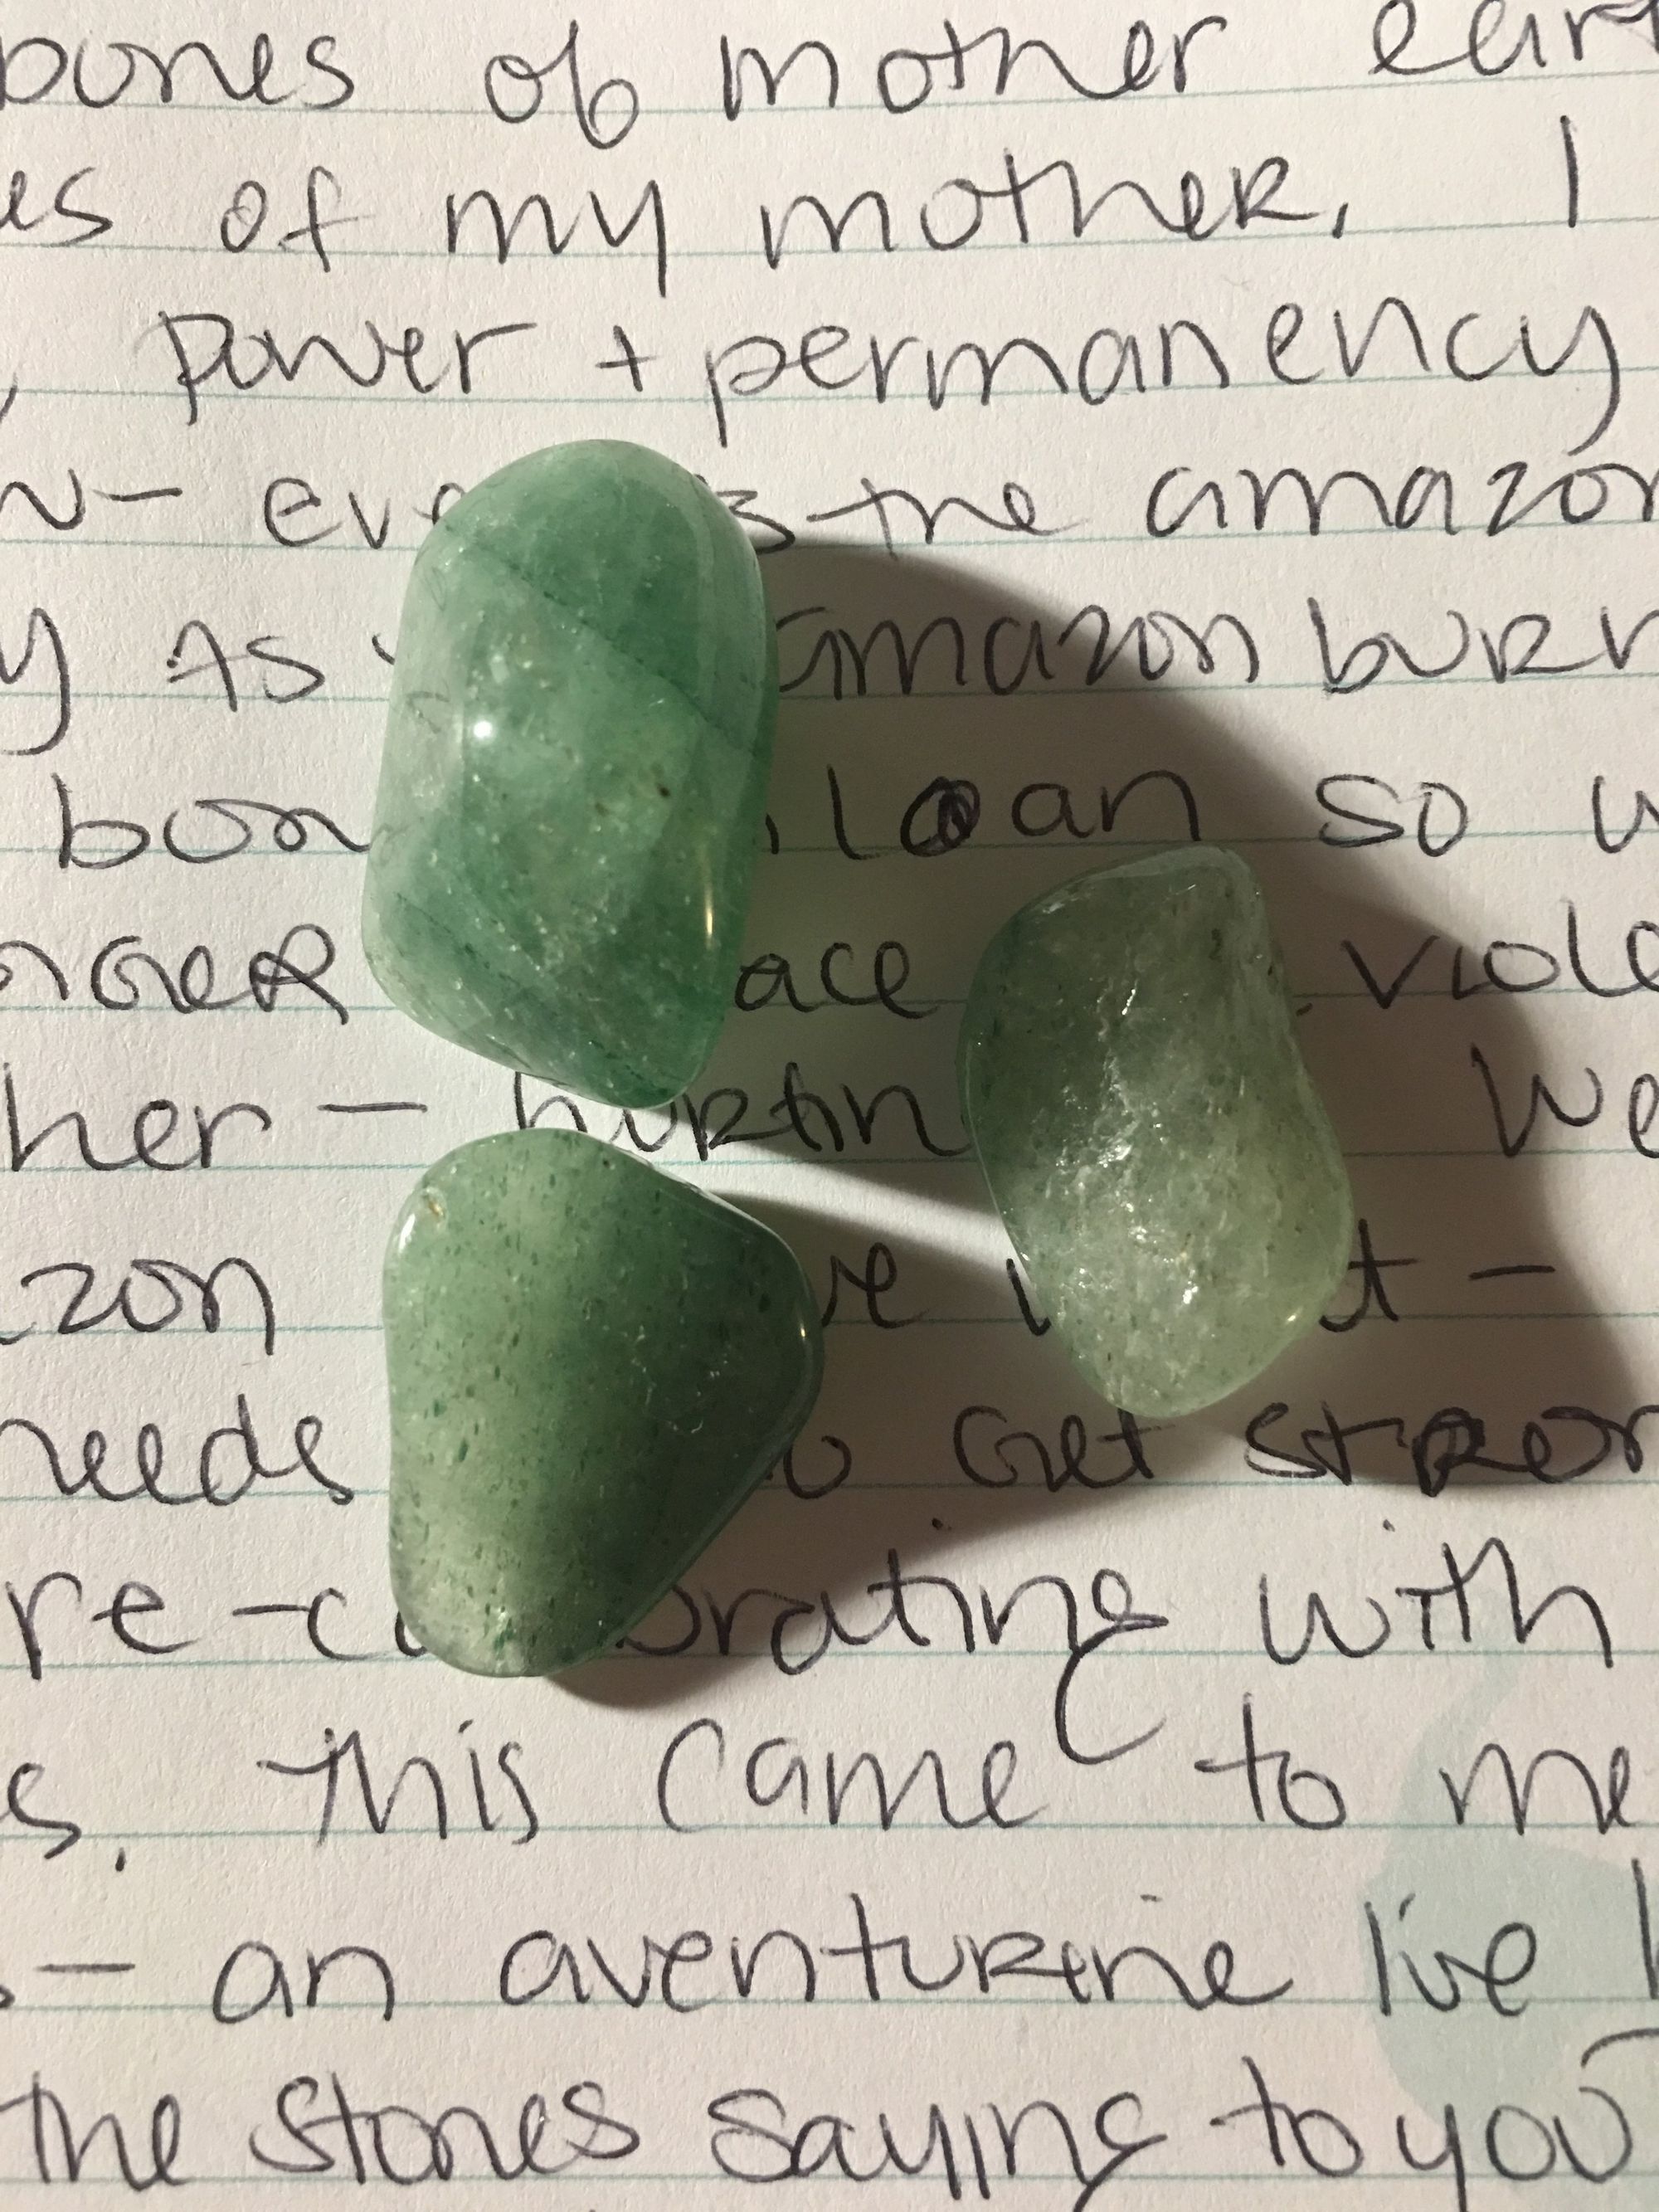 Allow me to explain starting with this photo of me writing down this transmission longhand. I’m working with aventurine stones (among others) to facilitate my healing. This transmission JUMPED through to the page as I held each of these stones. It c…